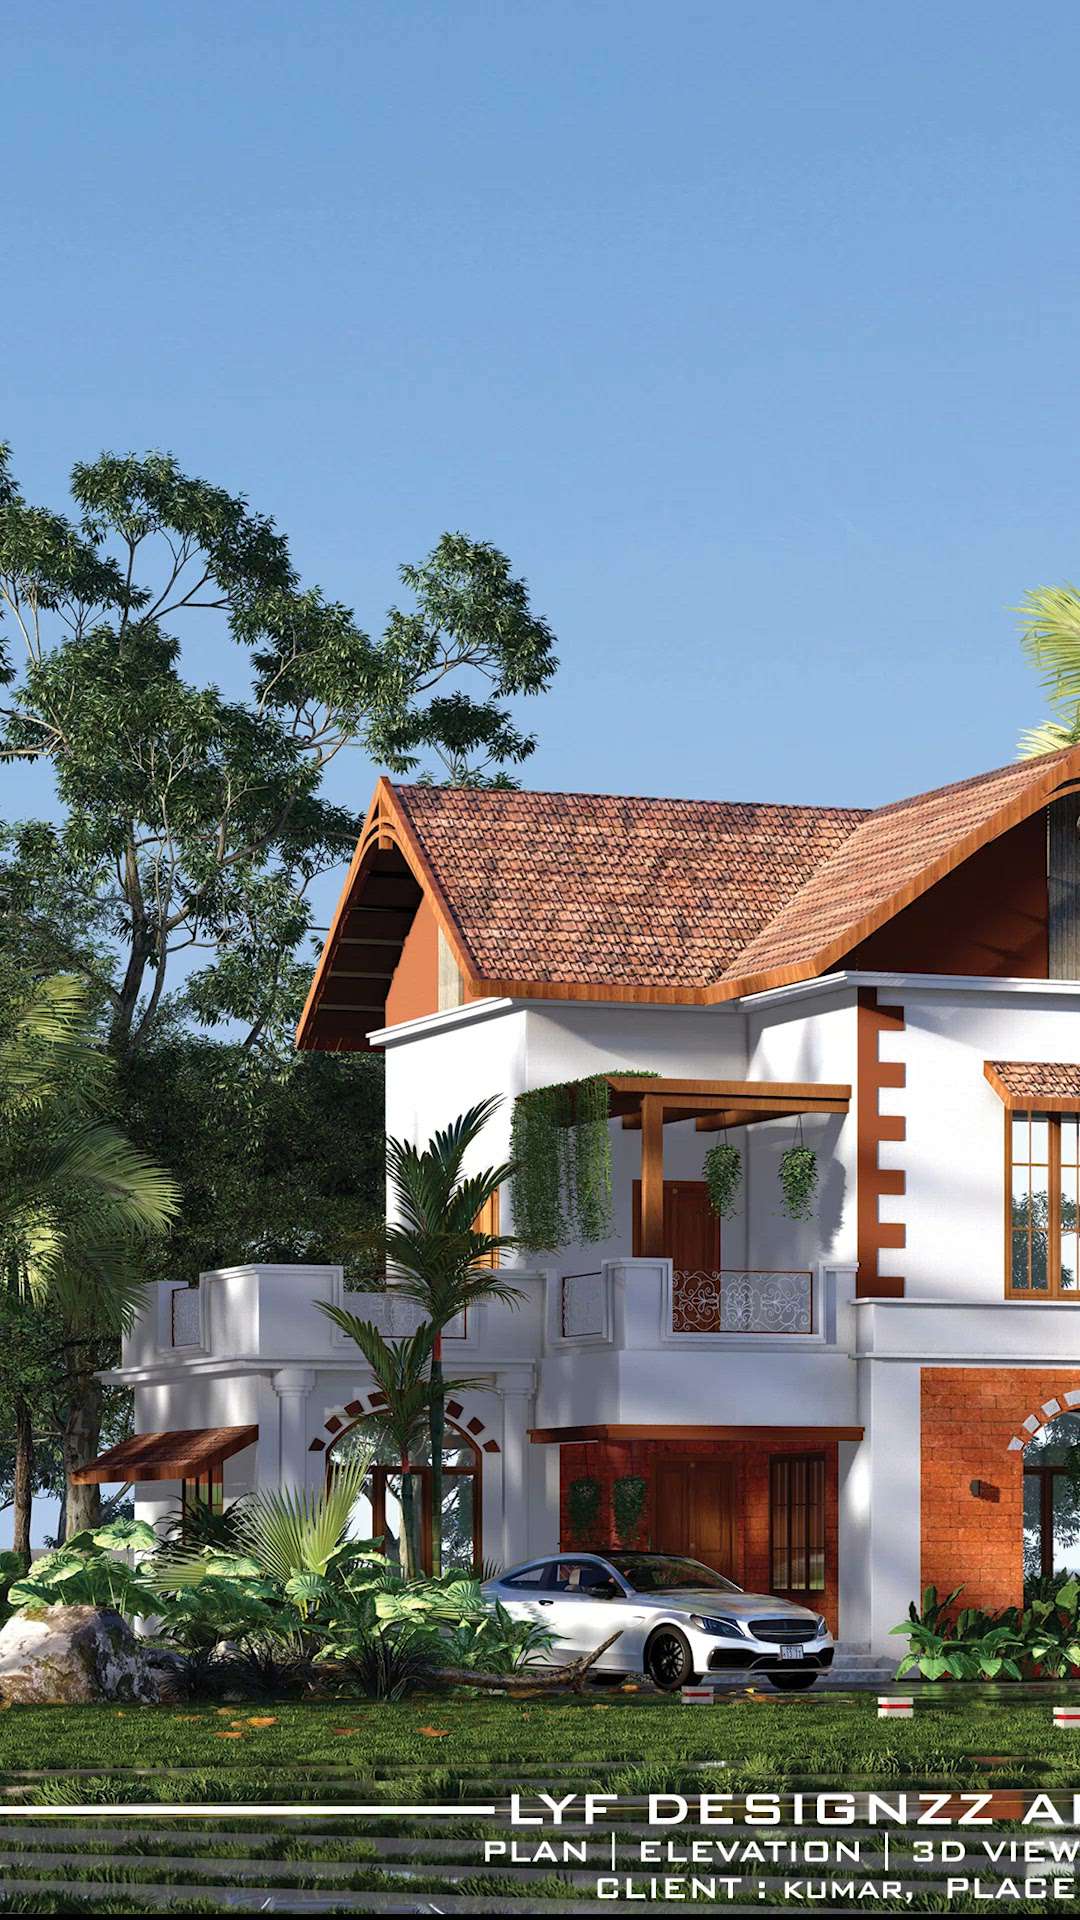 muslim colonial design
Exterior design work of residence 
.
.
Type: residential 
Client: Kumar
Place: Coimbatore 
Area: 3650sqft
.
.
#homedesign #homedecor #interiordesign #design #home #interior #architecture #decor #homesweethome #interiors #decoration #furniture #interiordesigner #homedecoration #interiordecor #luxury #art #interiorstyling #homestyle #livingroom #inspiration #designer #handmade #homeinspiration #homeinspo #house #realestate #kitchendesign #style #homeinteriordesigncompany